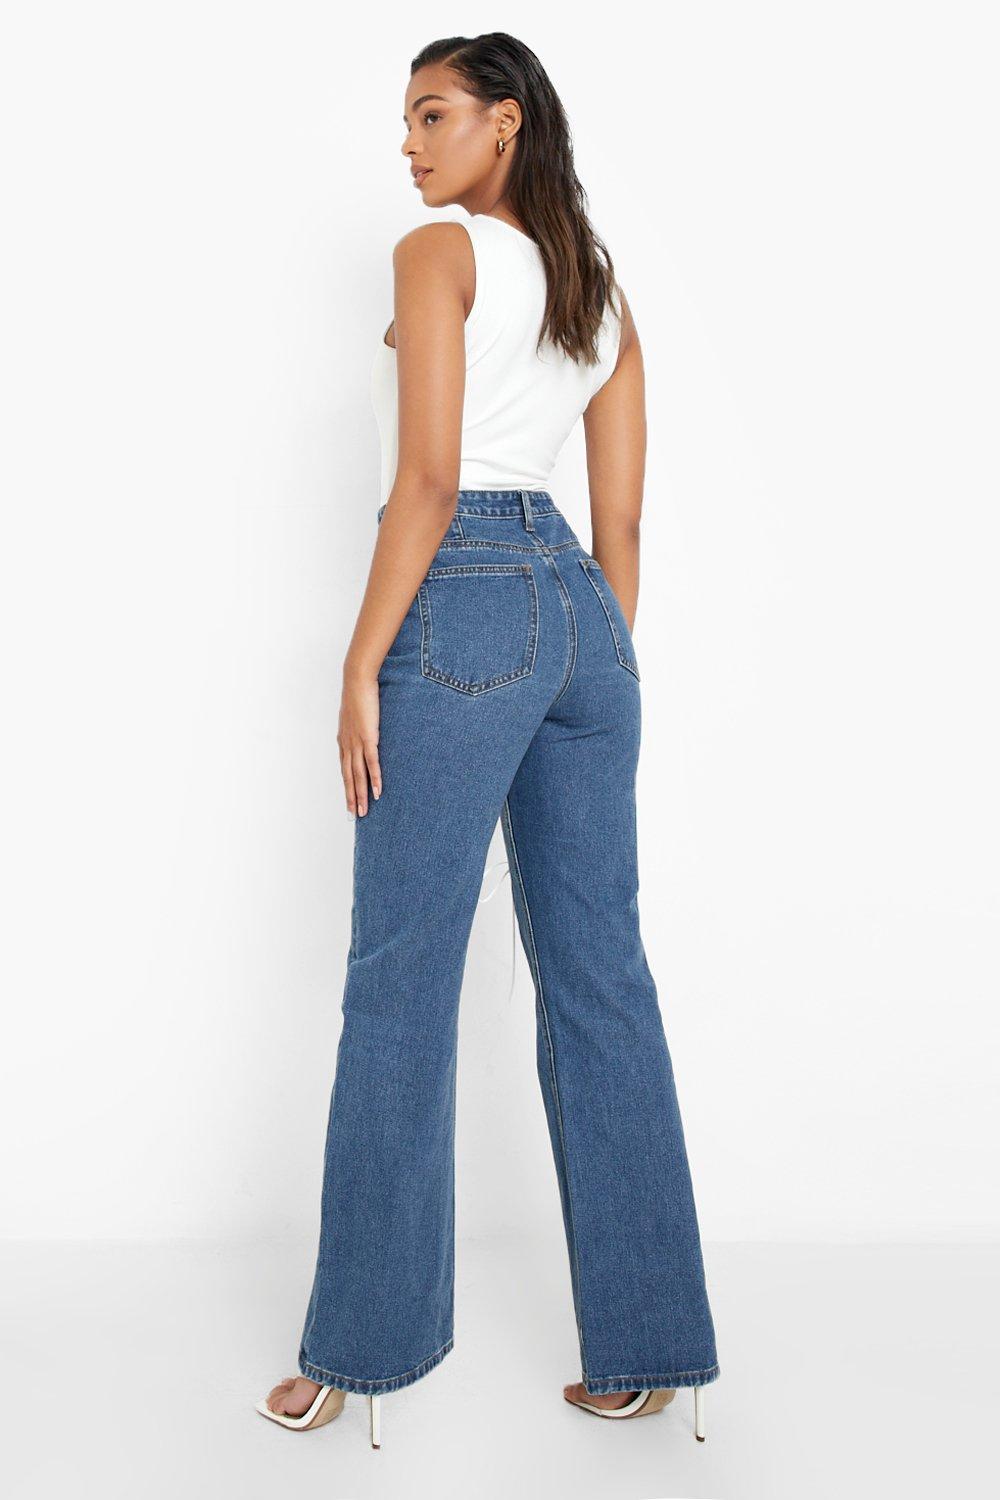 2140 Women's High Waisted Flare bell bottom bootcut Jeans w/ Slice